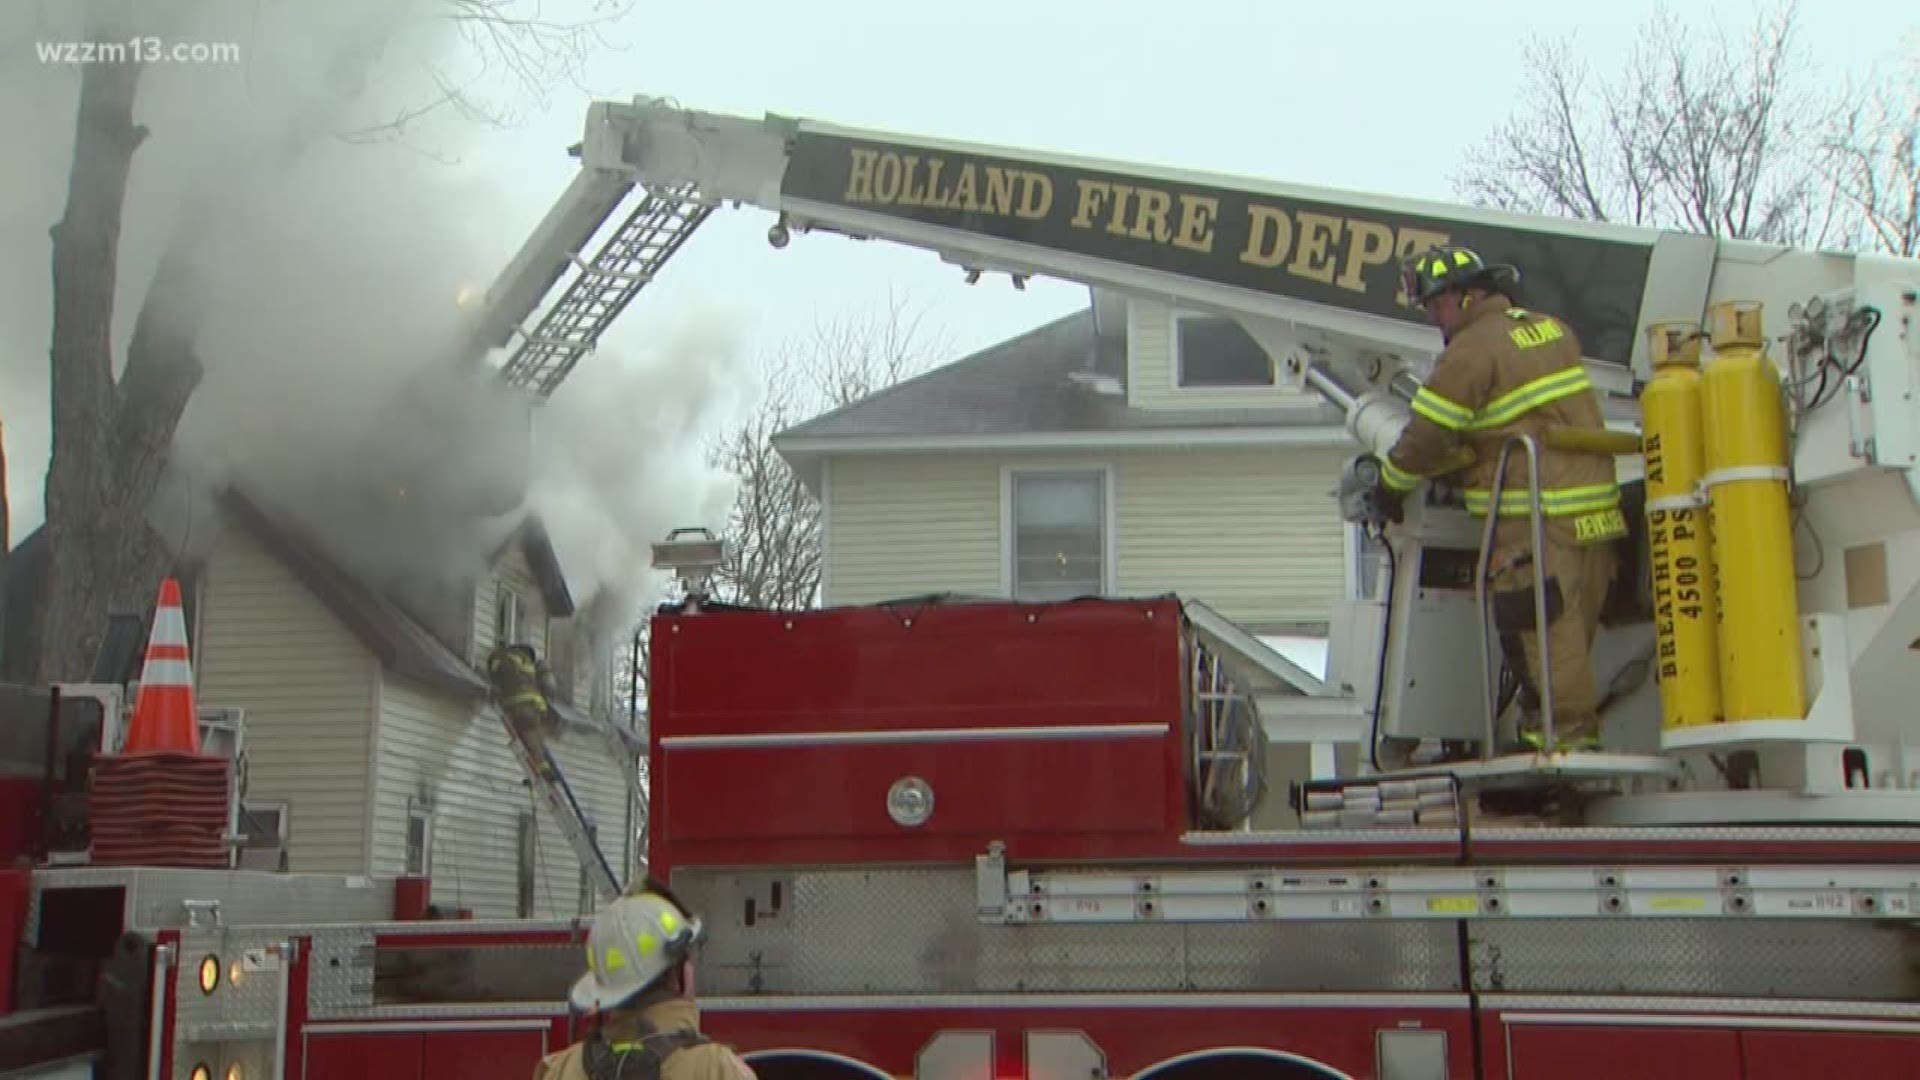 House fire in Holland, six injured